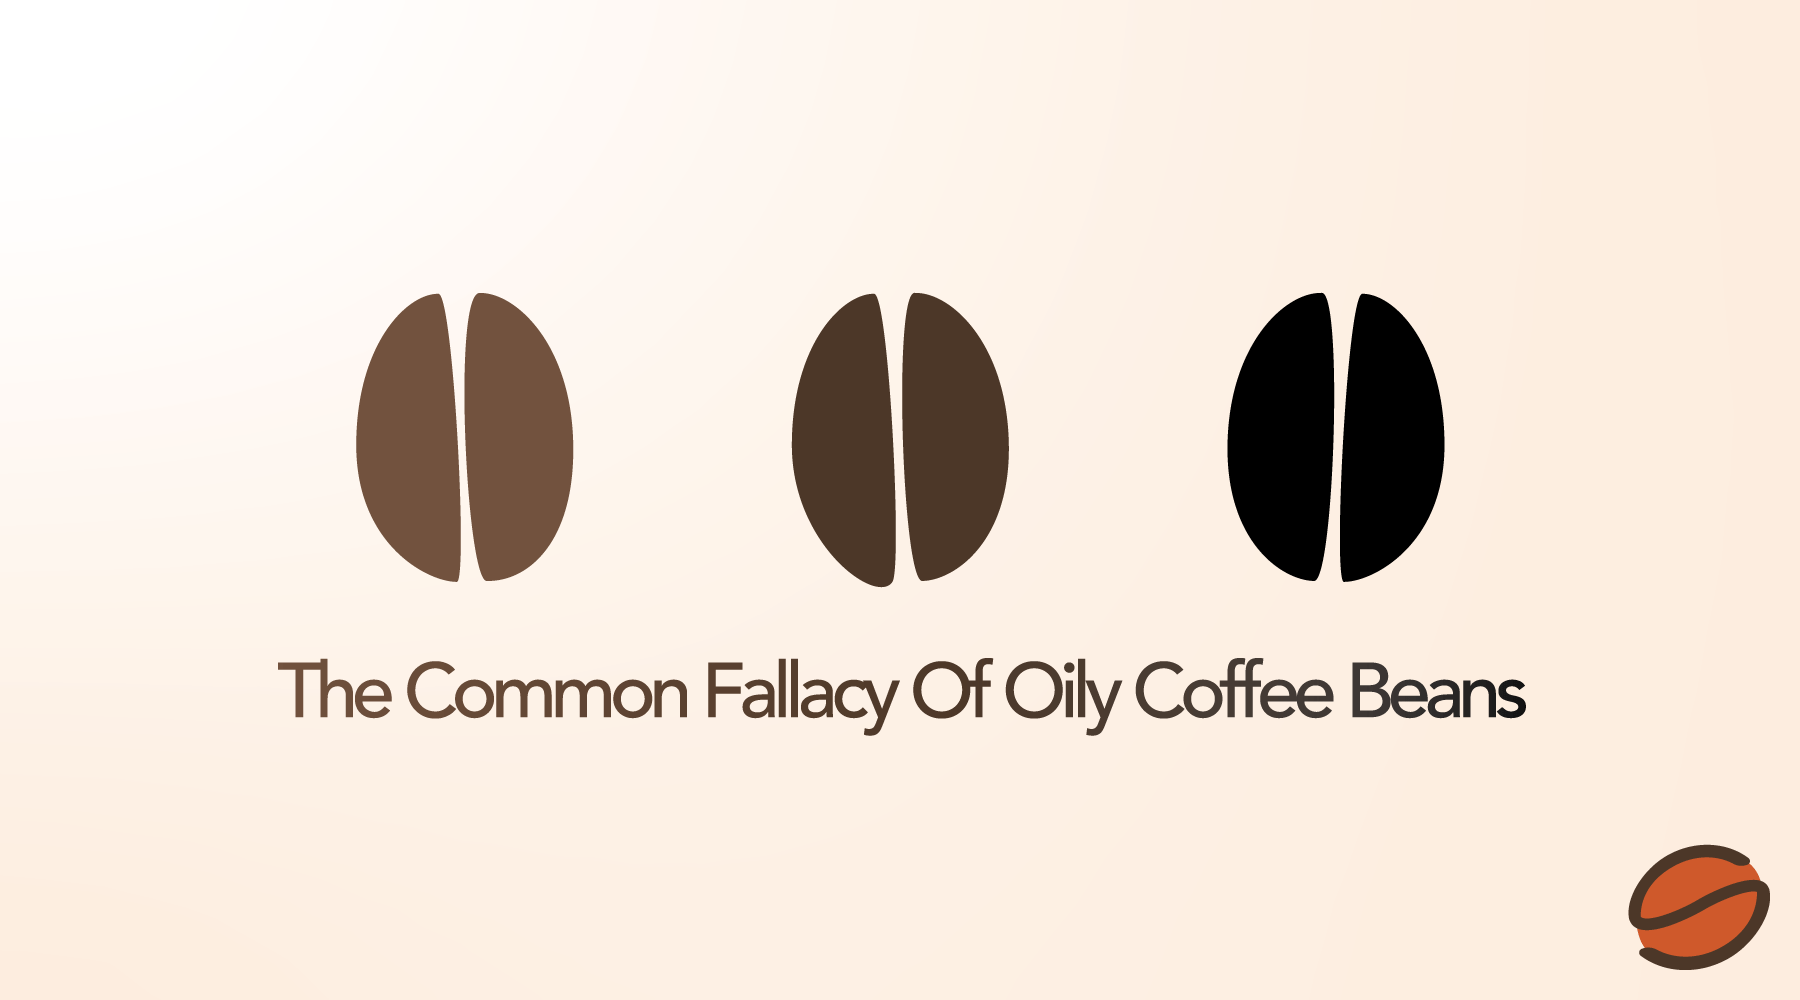 The Common Fallacy Of Oily Coffee Beans Explained.